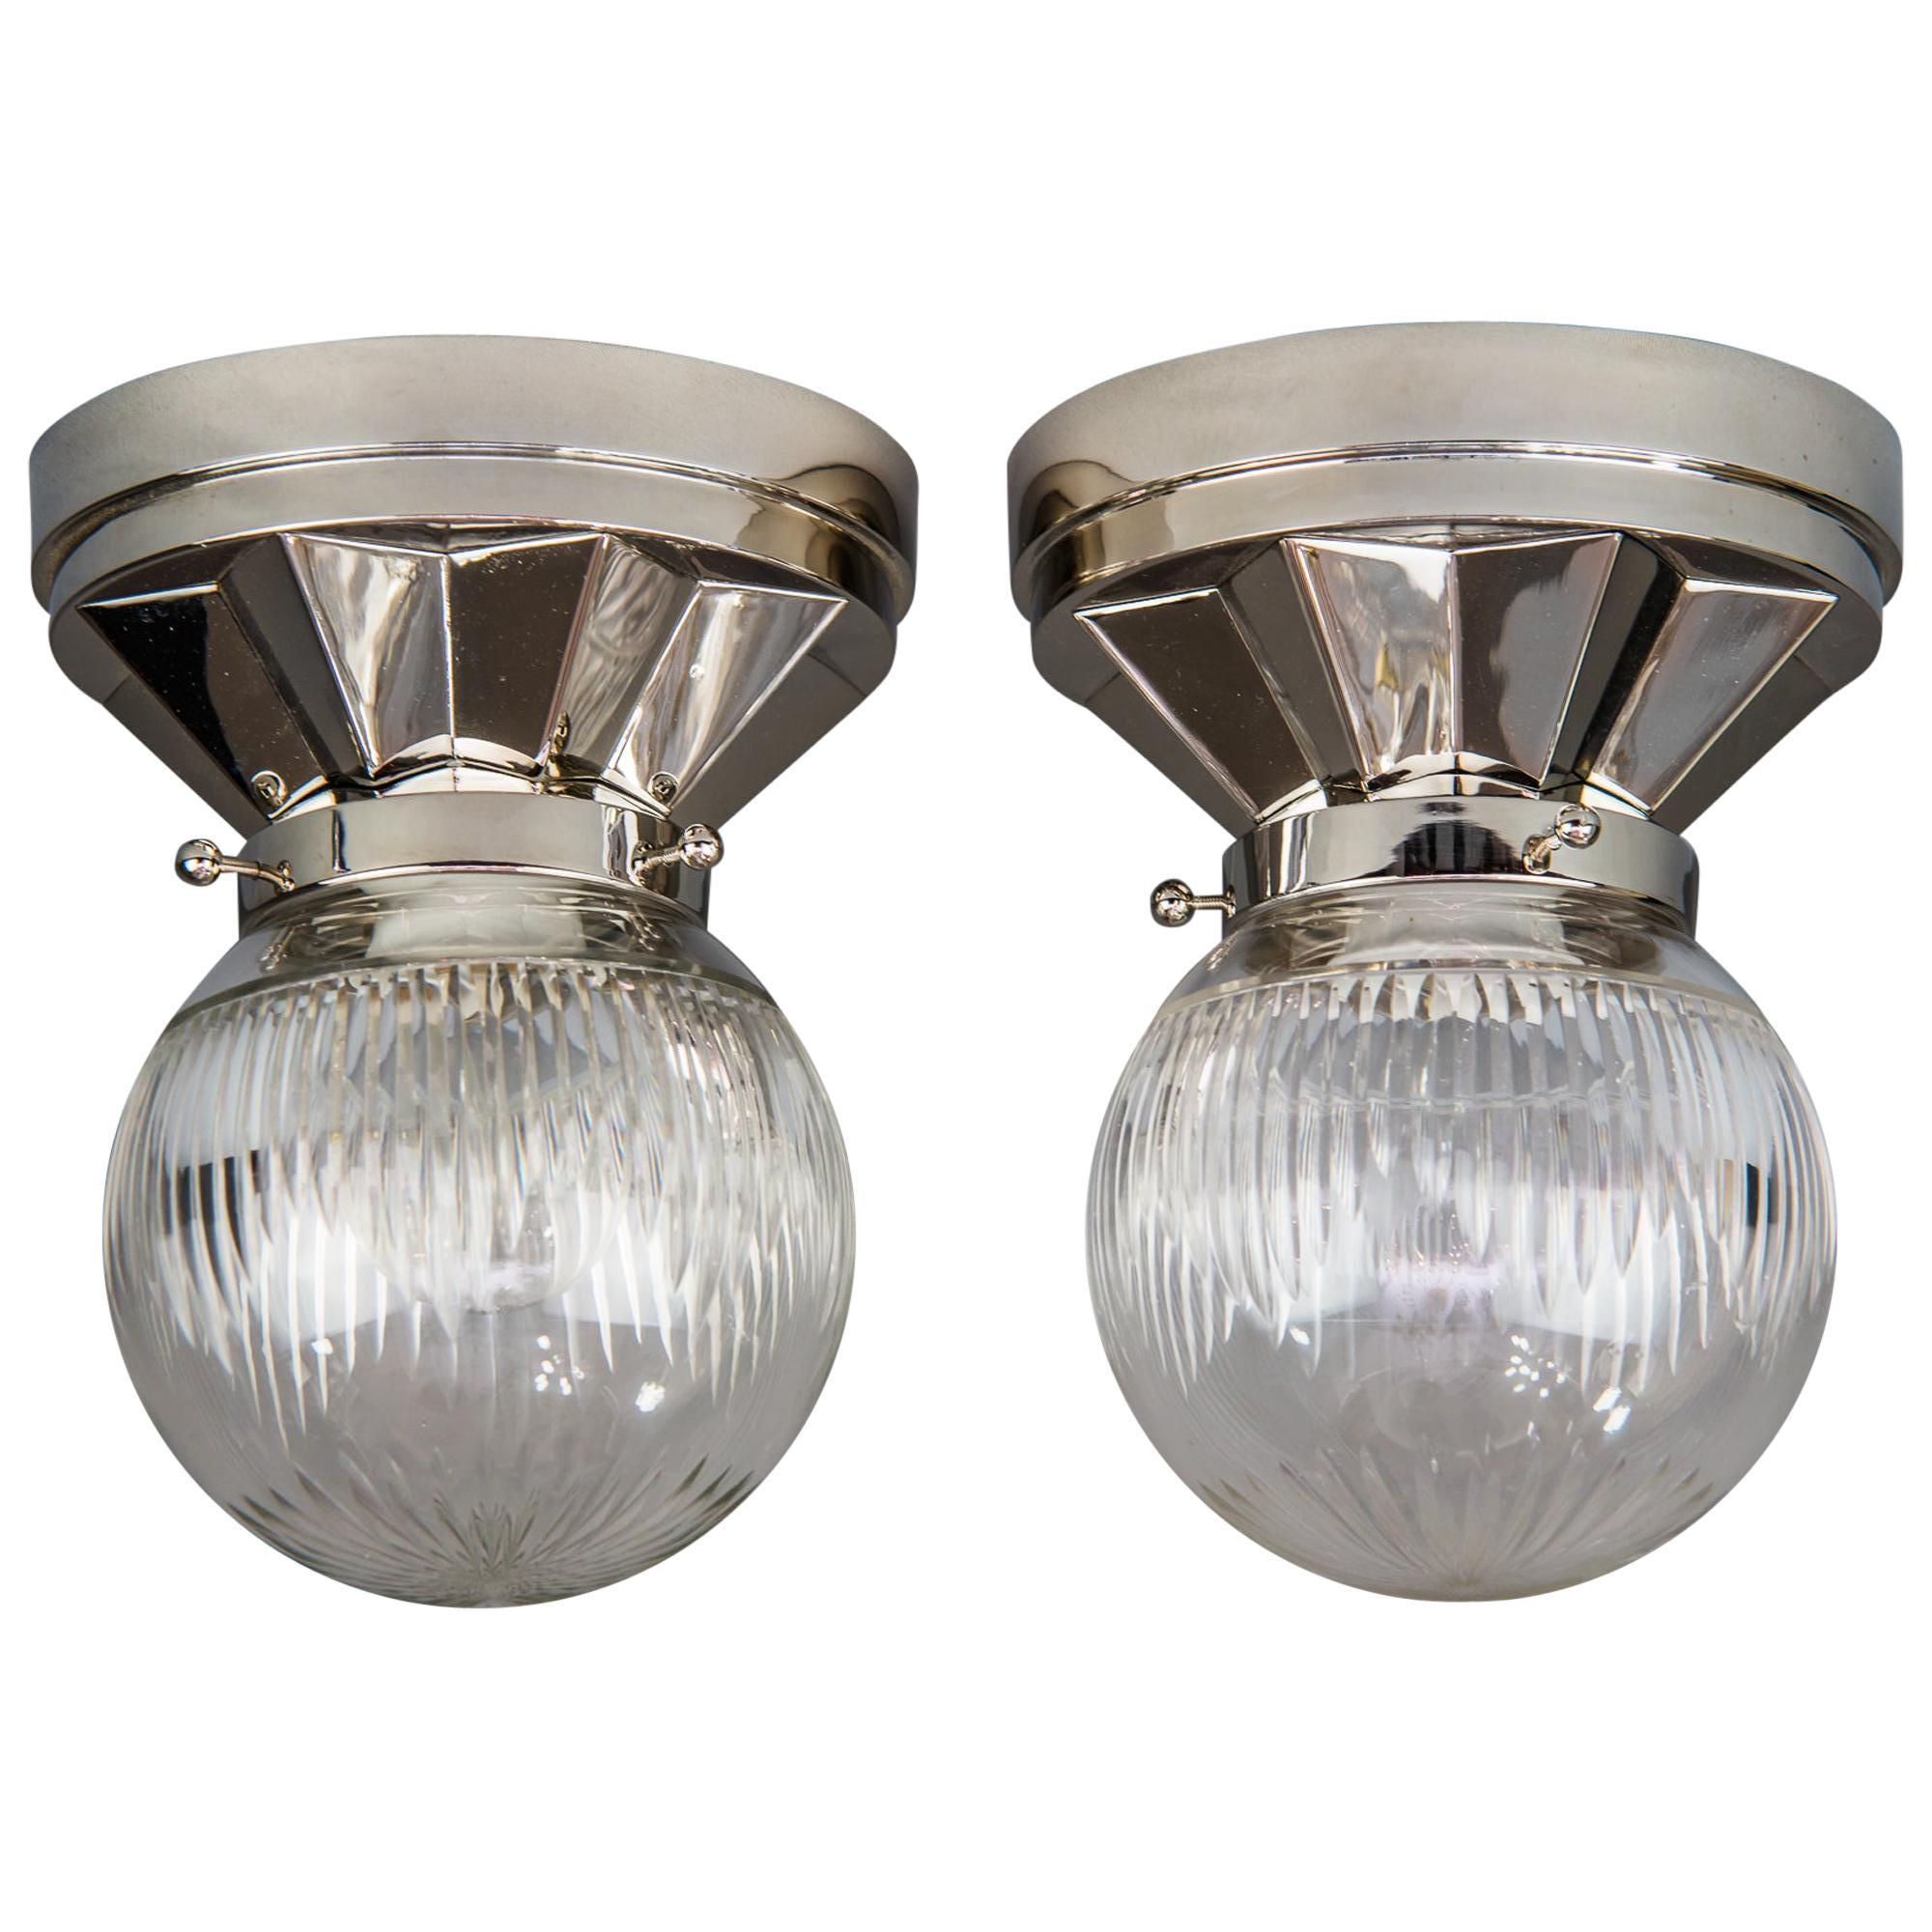 Two Nickel Plated Art Deco Ceiling Lamps, circa 1920s